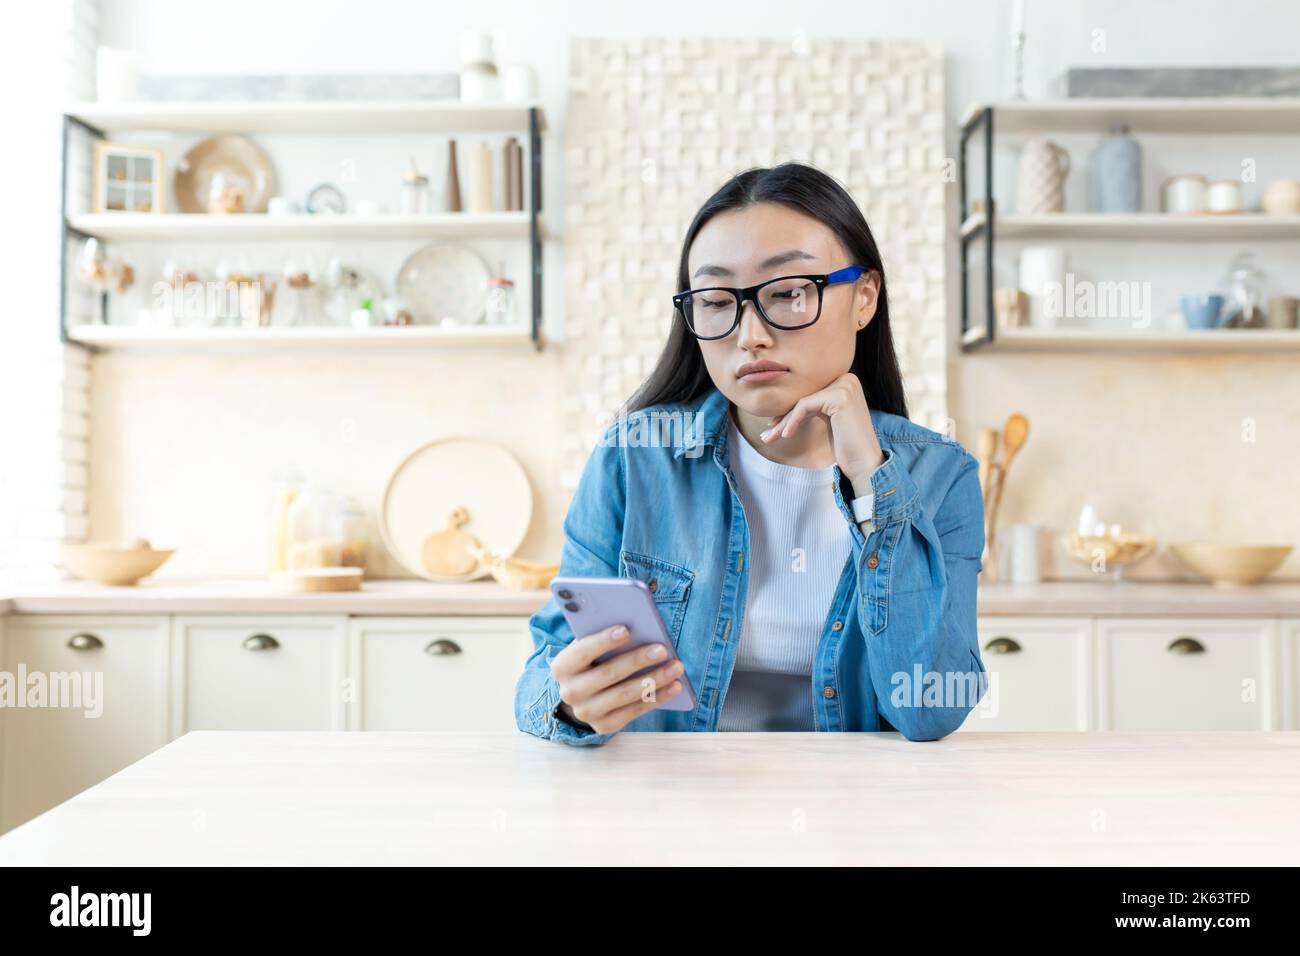 Sad woman at home sitting in kitchen reading news on phone, depressed asian woman holding smartphone in glasses and shirt. Stock Photo